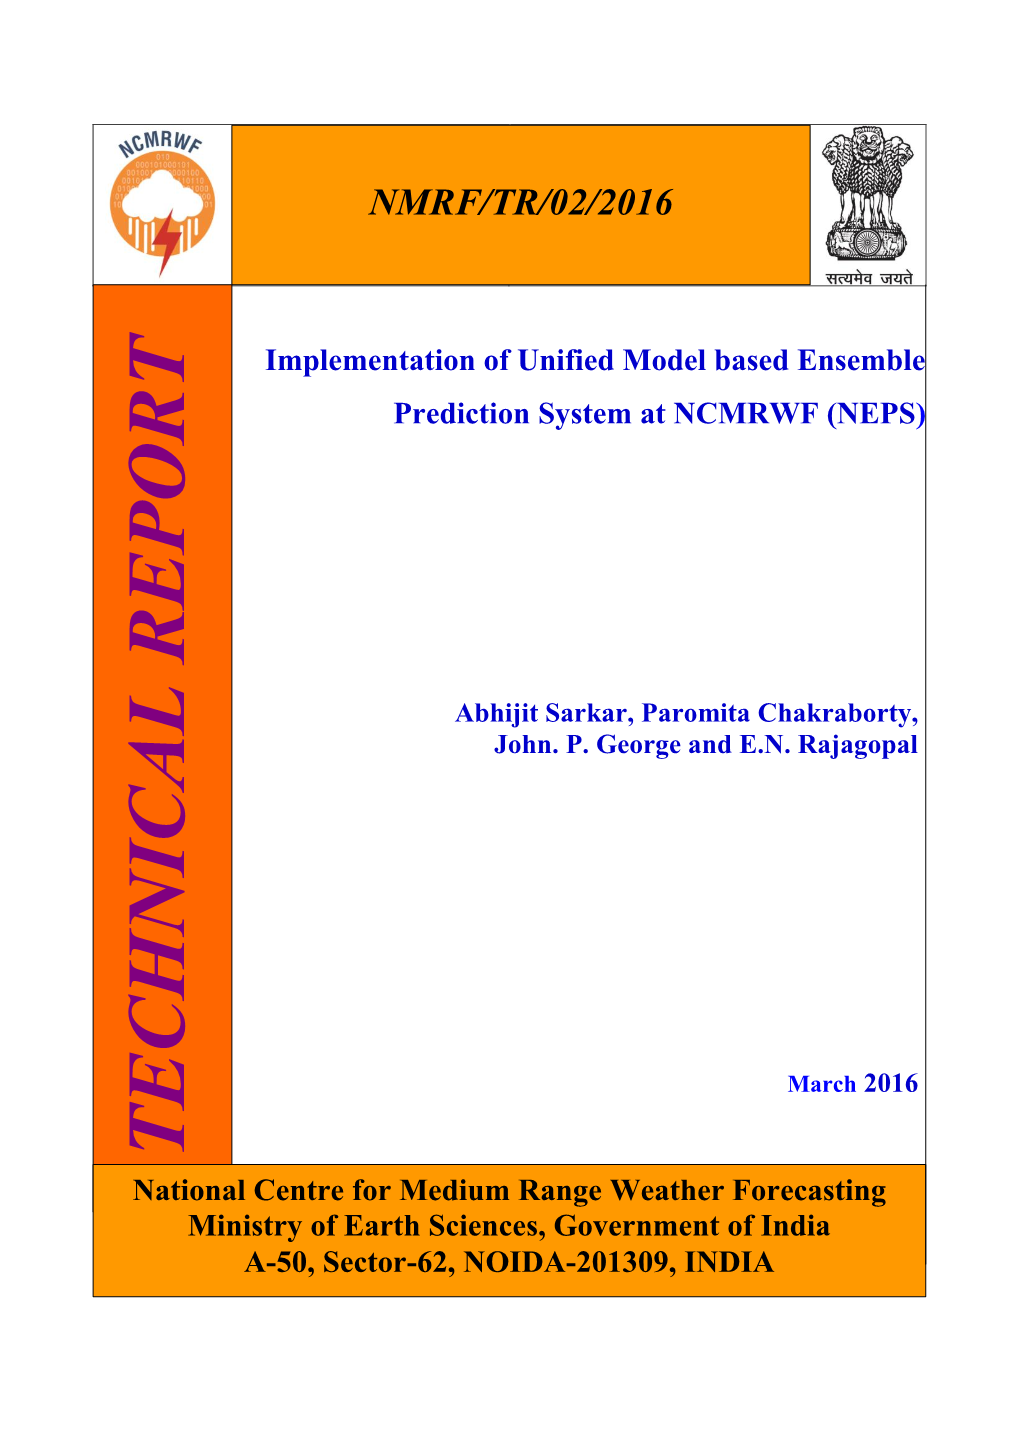 Implementation of Unified Model Based Ensemble Prediction System at NCMRWF (NEPS)